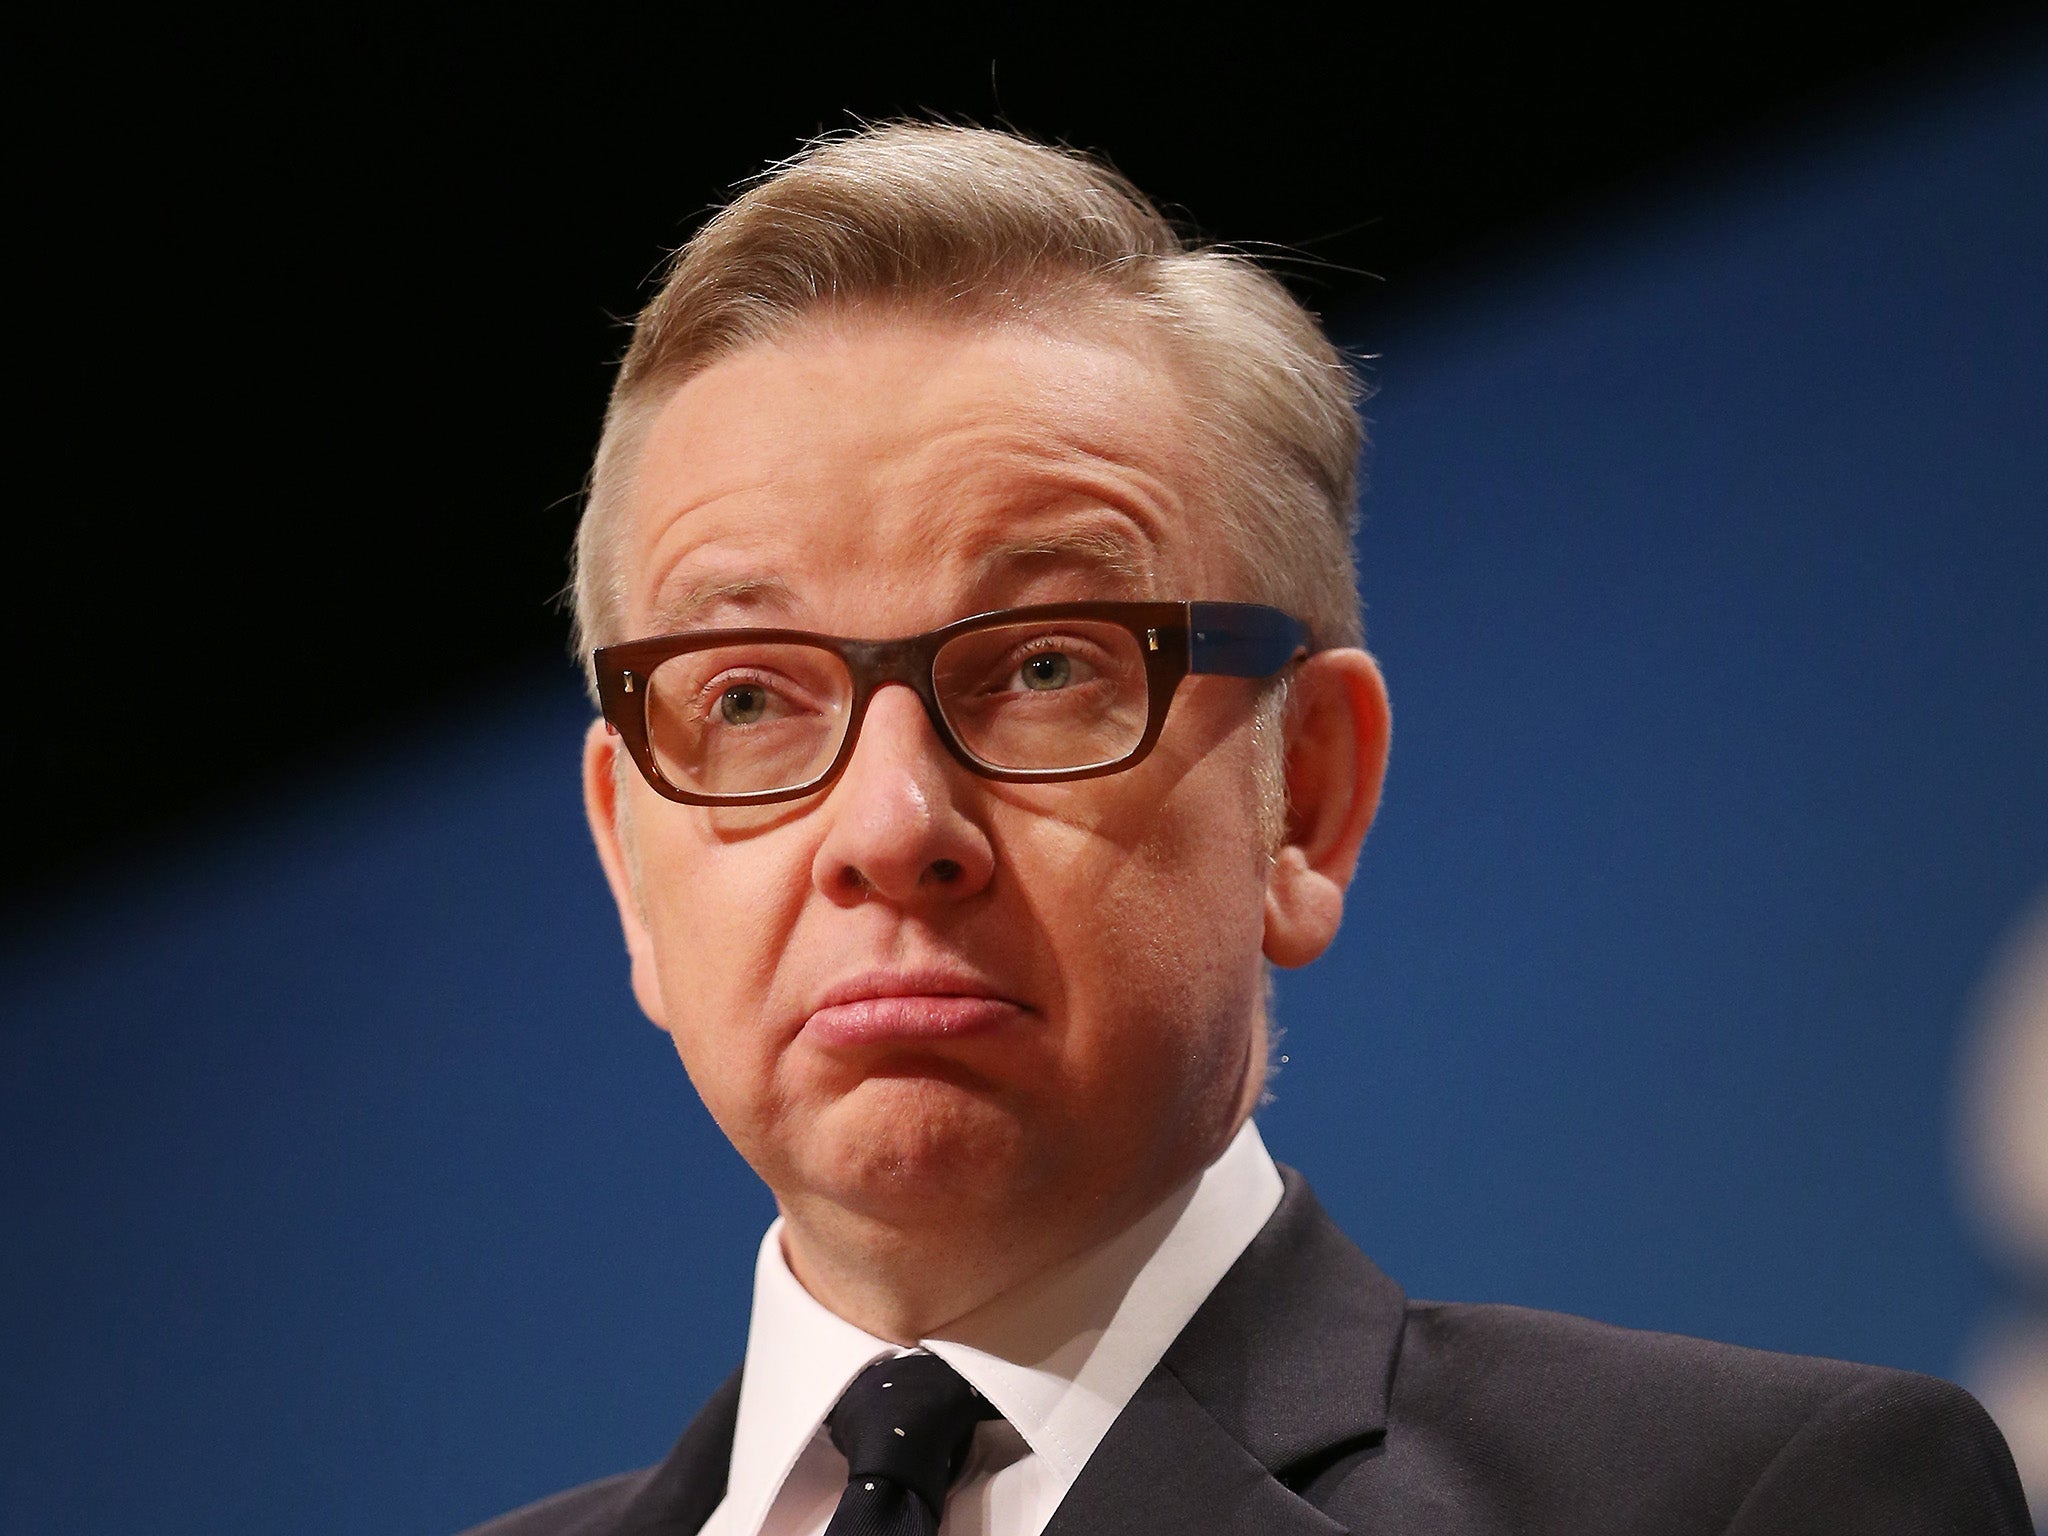 Michael Gove has announced his candidacy for the leader of the Conservative Party